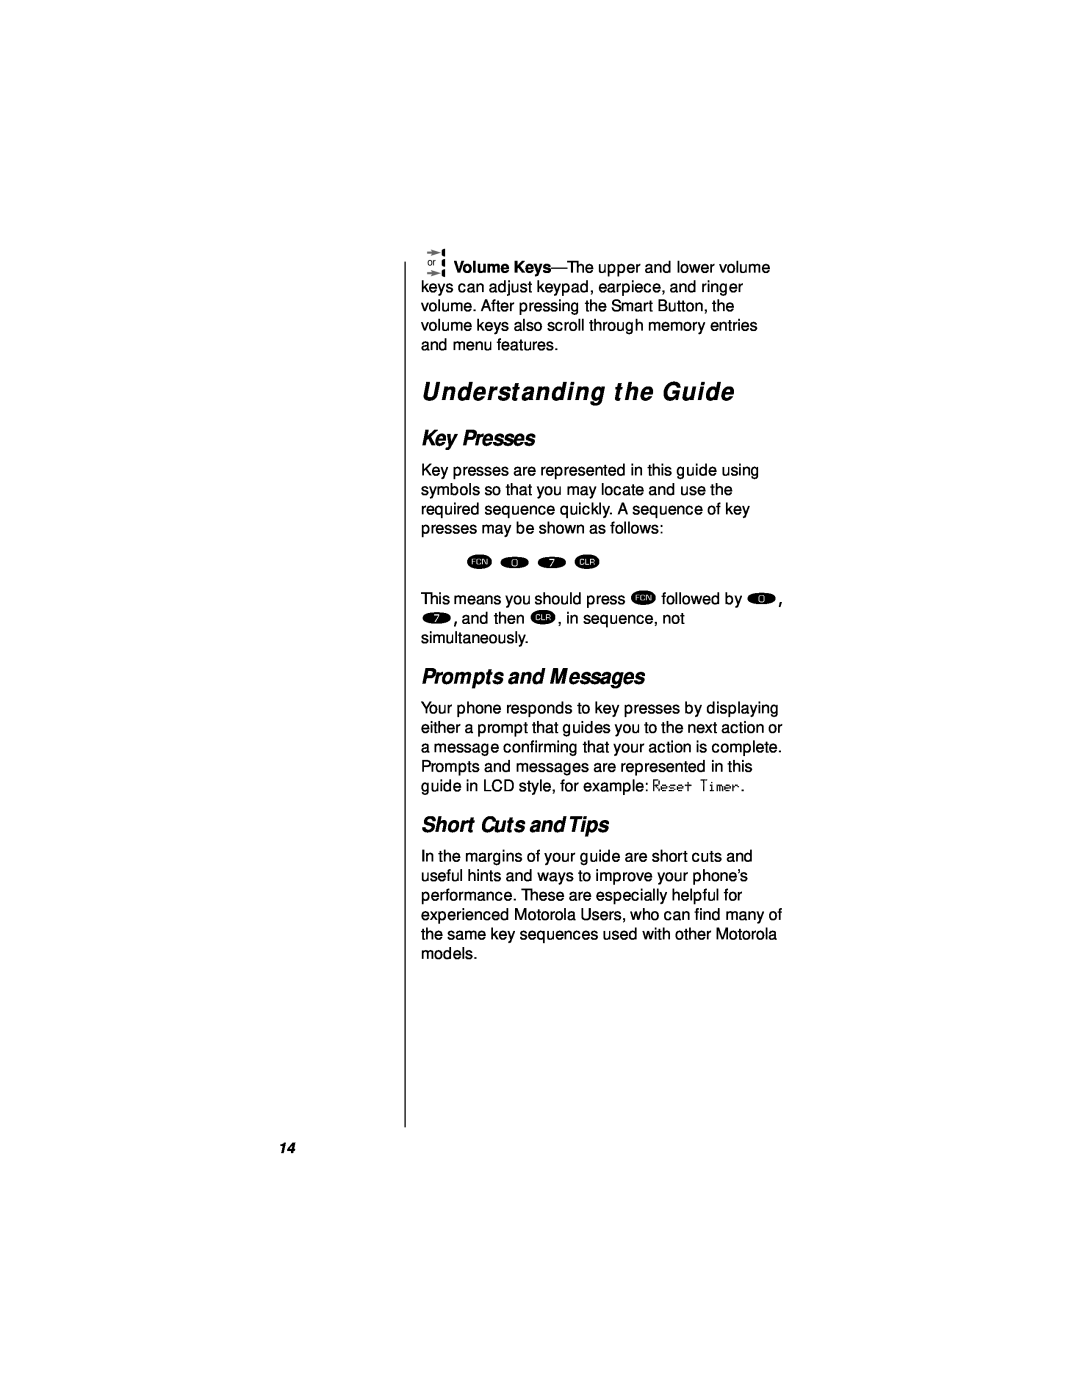 Motorola StarTAC specifications Understanding the Guide, Ä â à ‚, Key Presses, Prompts and Messages, Short Cuts and Tips 